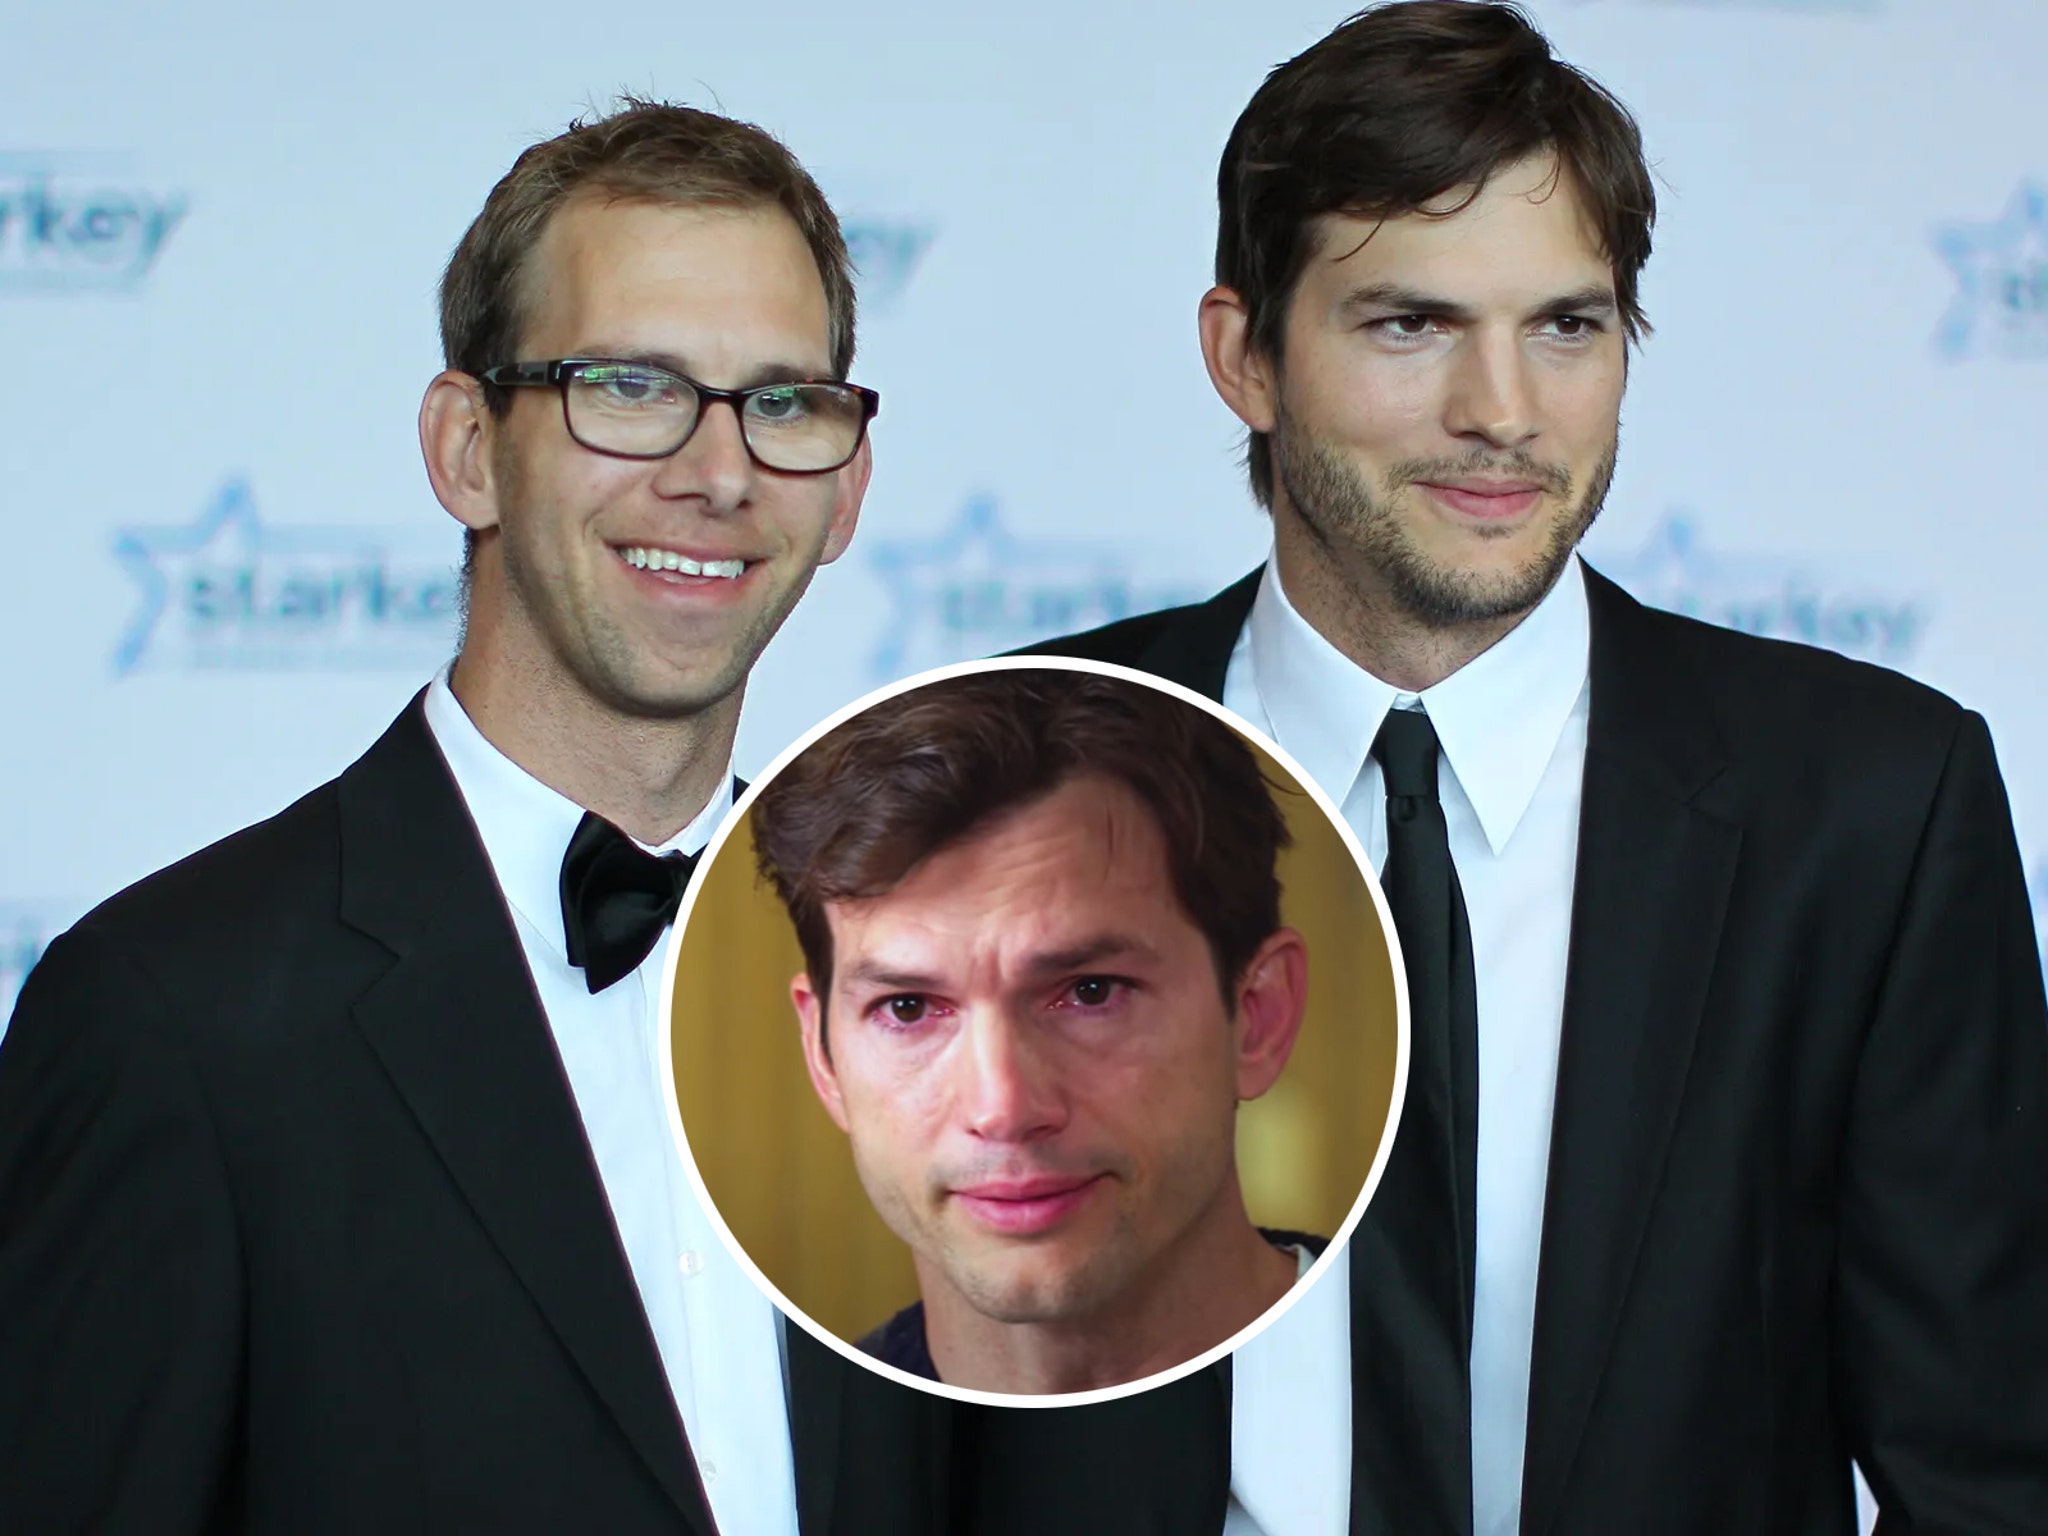 Ashton kutcher tears up recalling twin brothers near death experience